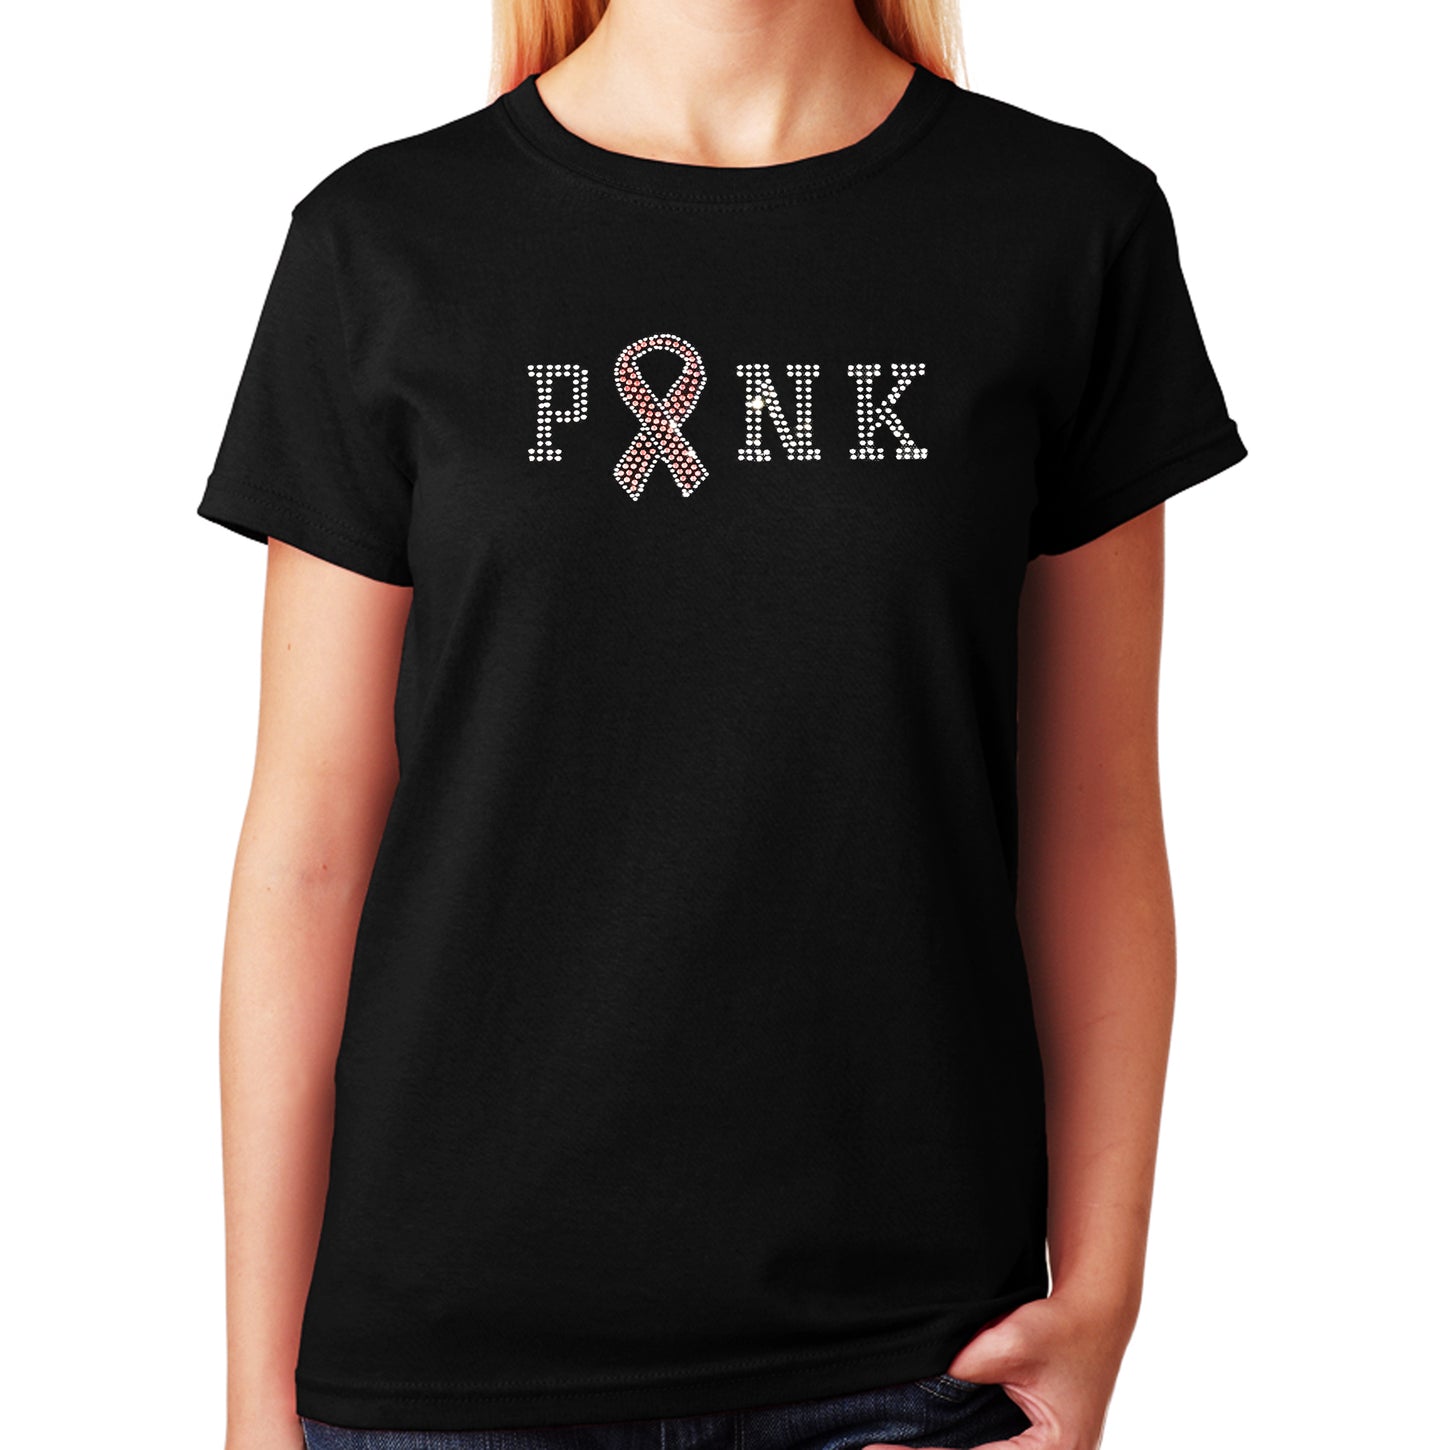 Women's / Unisex T-Shirt with Pink Cancer Awareness Ribbon in Rhinestones